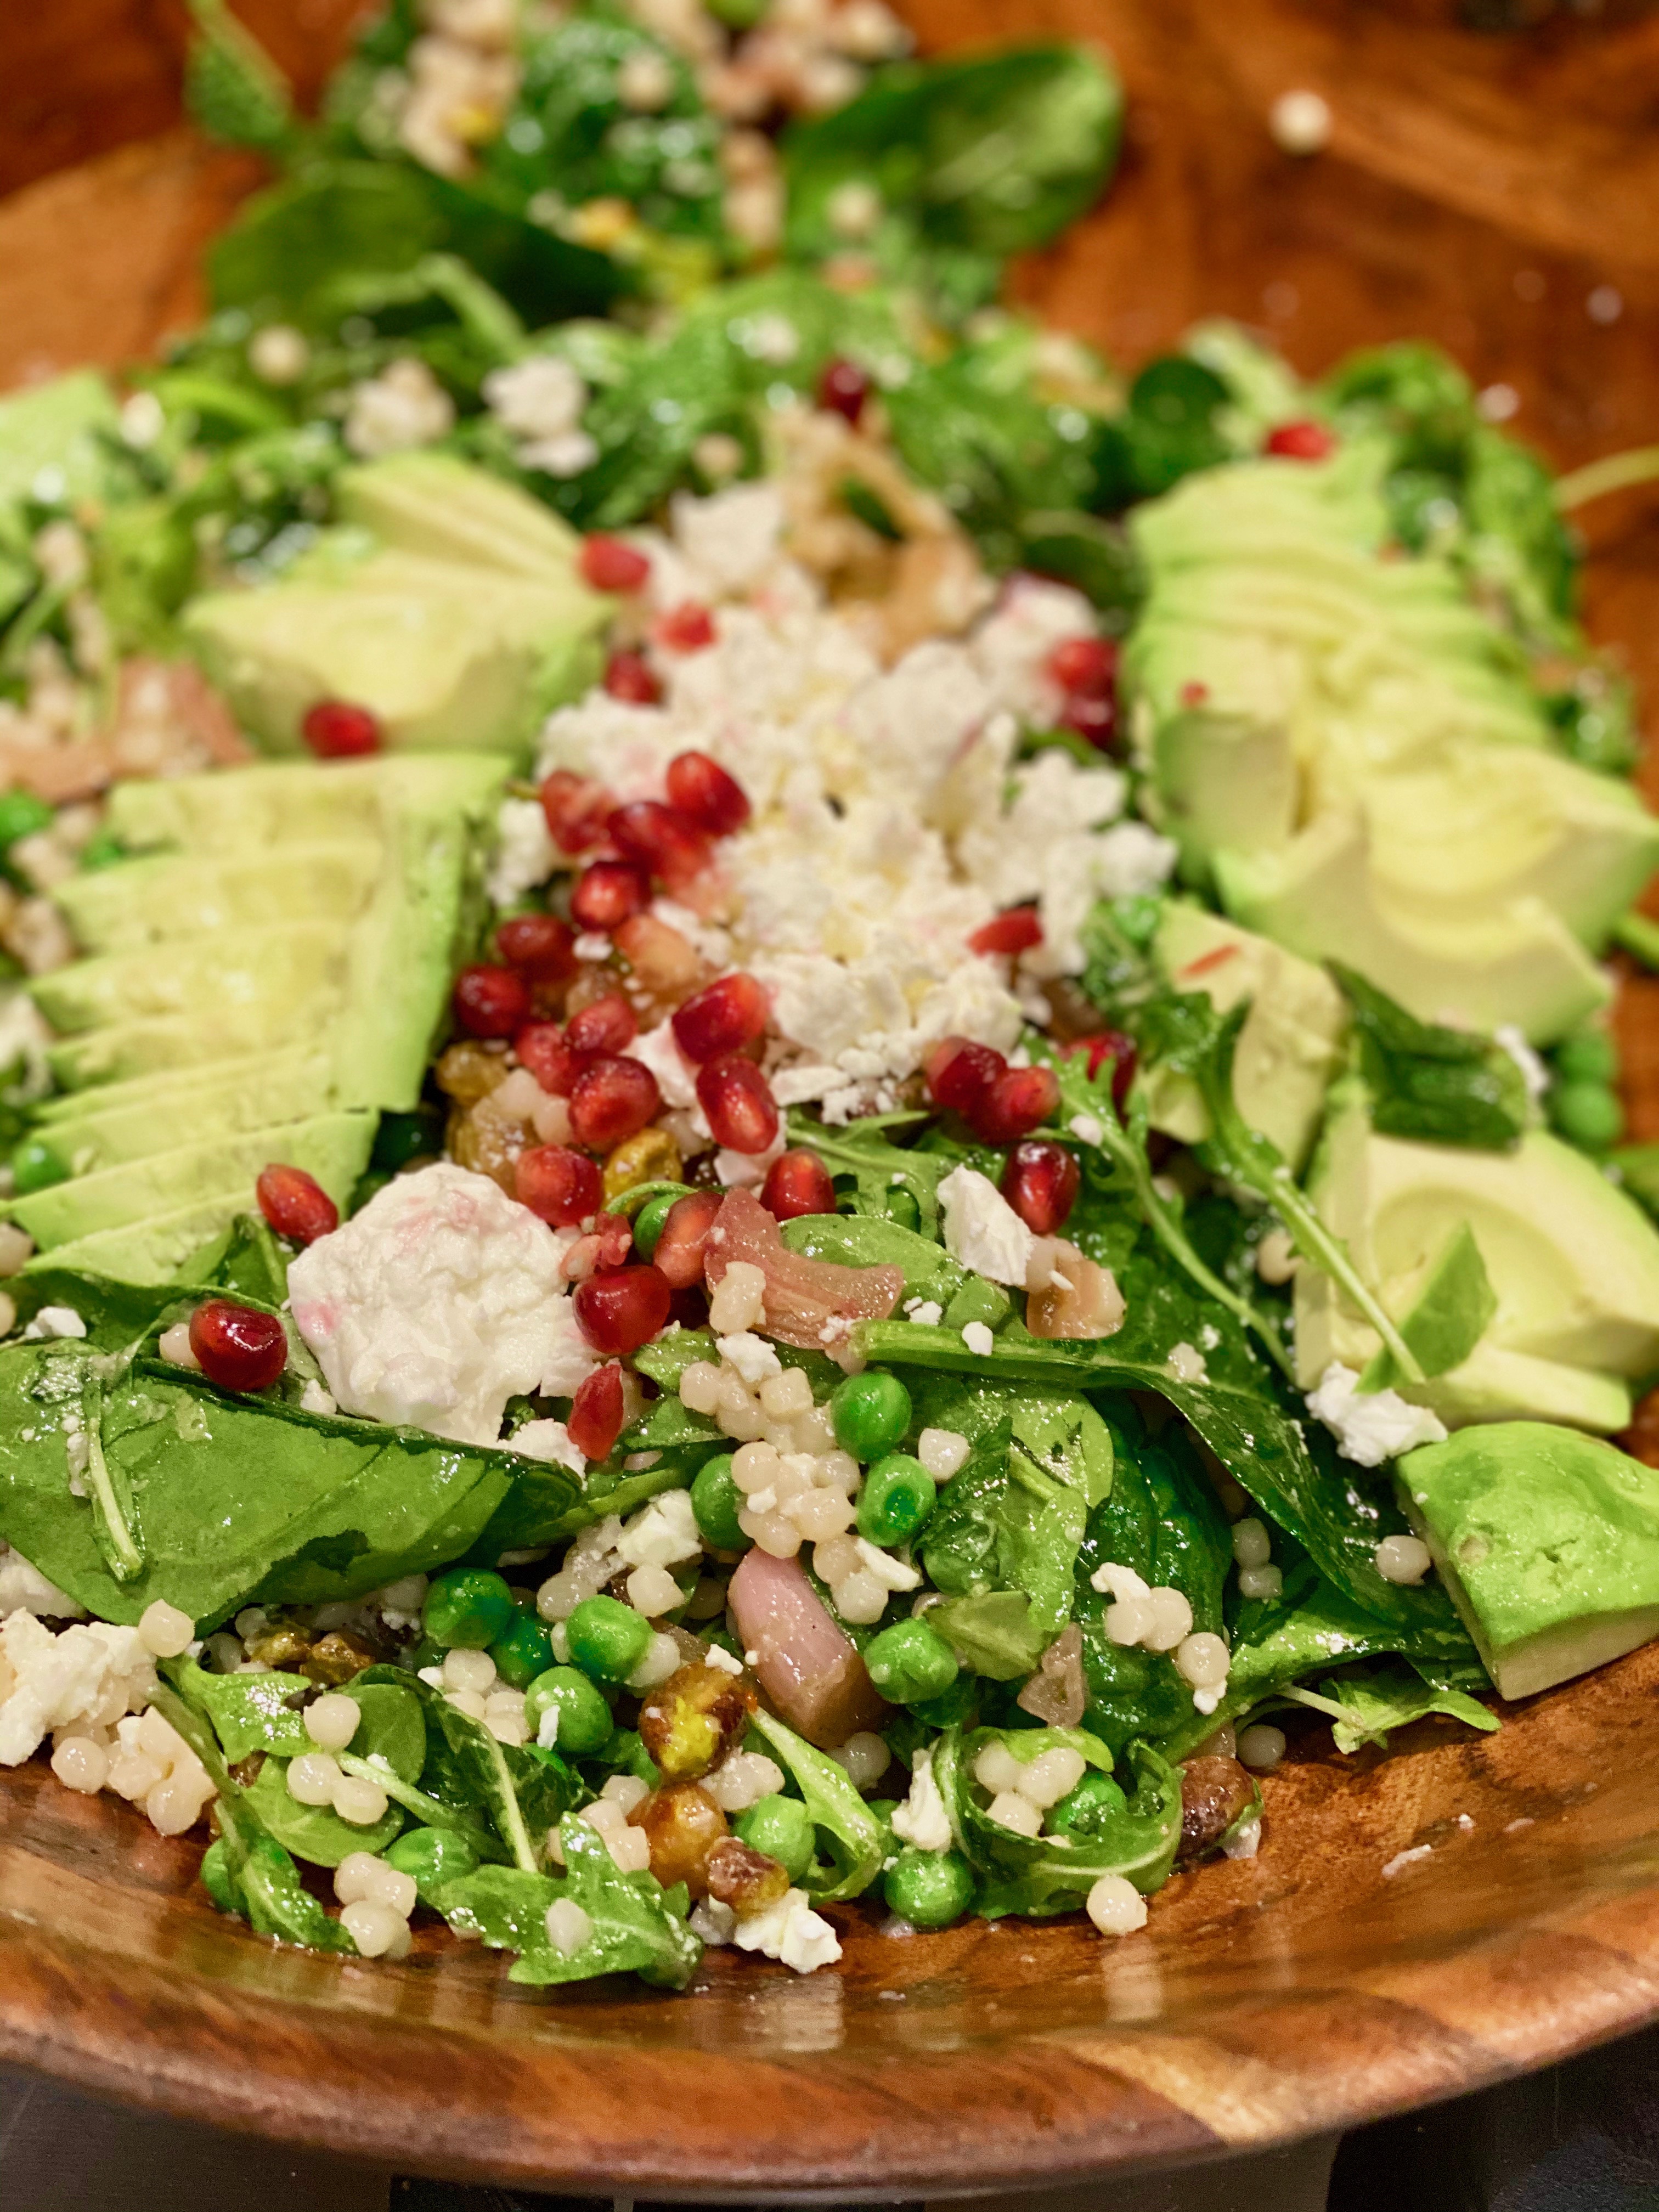 a close up picture of feta cheese, pomegranate arils, avocado and greens in a large salad bowl 